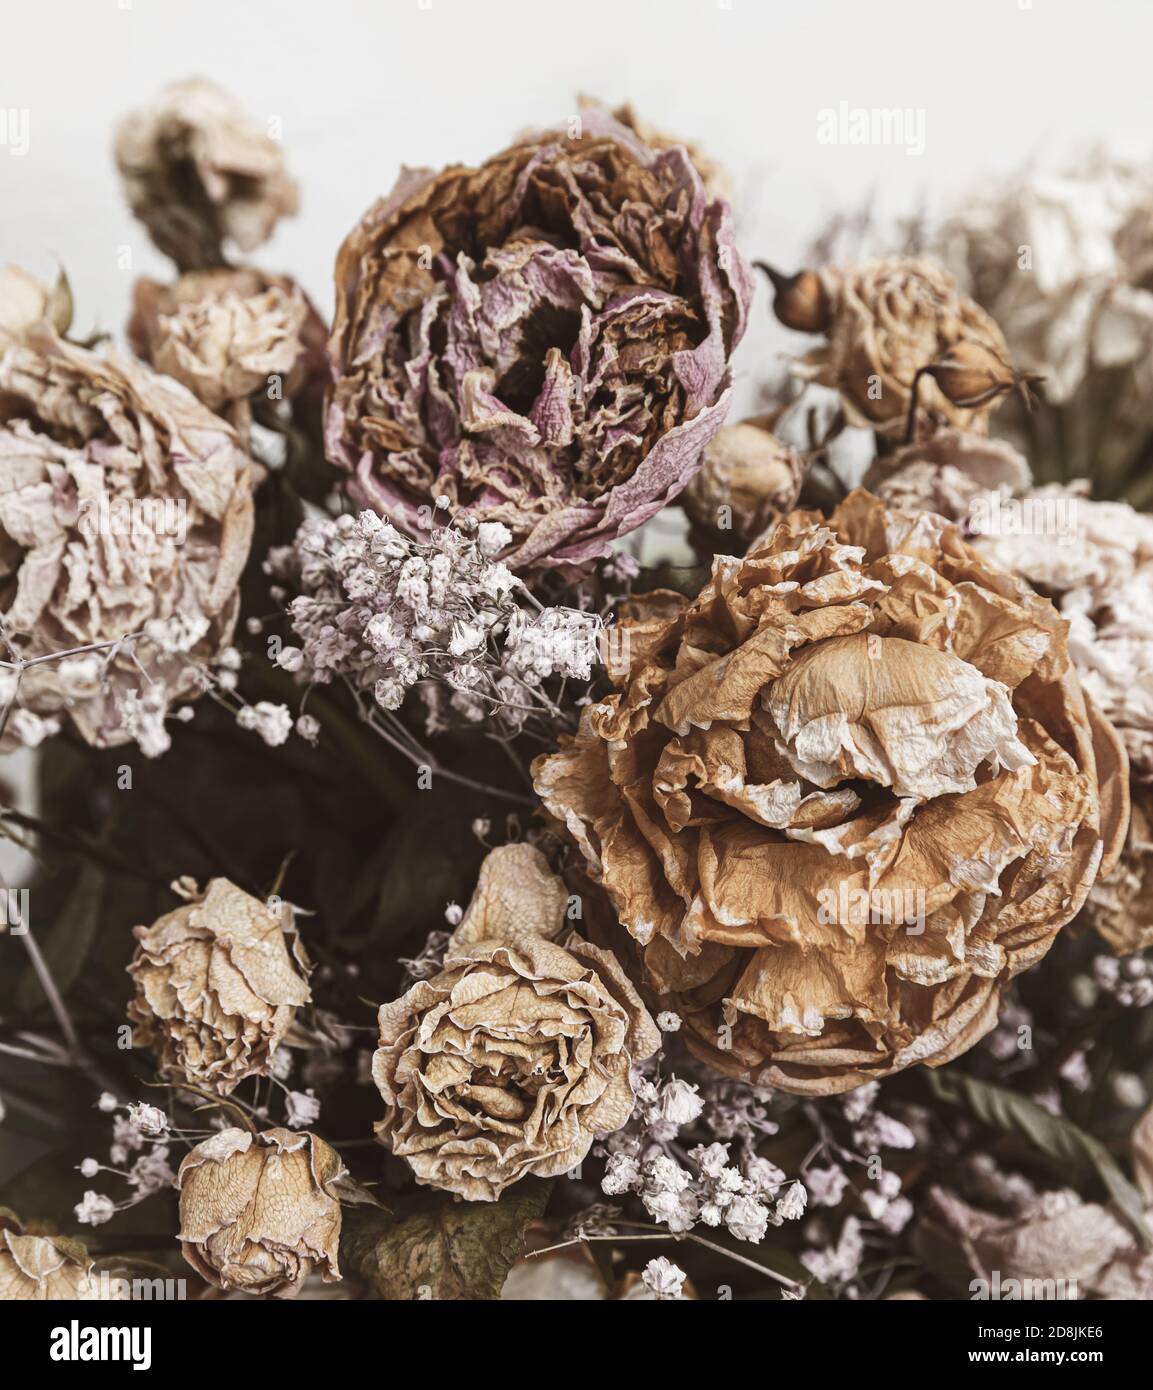 Dry bouquet. Close-up image of dried flowers in a bouquet. Life and death  concept. Withered flower background Stock Photo - Alamy